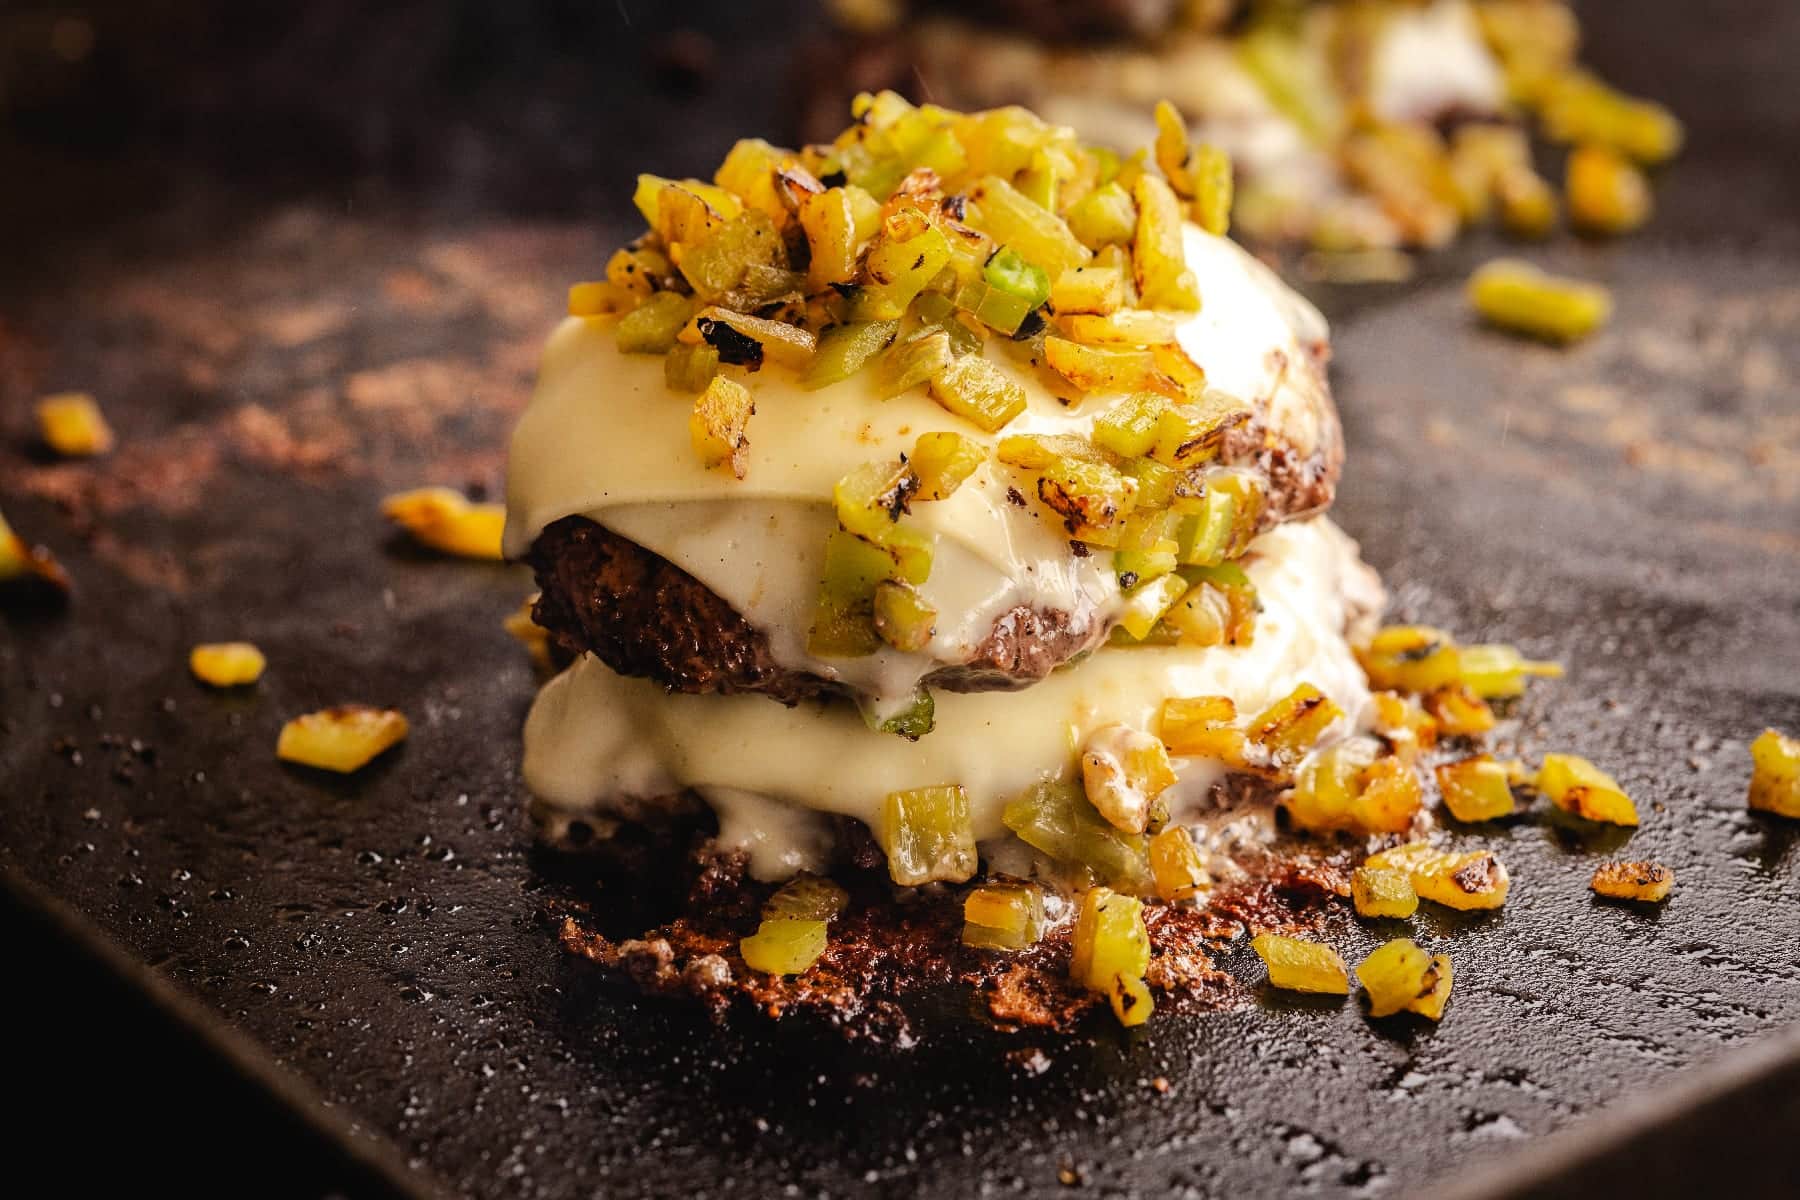 Double stacked patties with melted cheese topped with diced Hatch chiles on griddle.